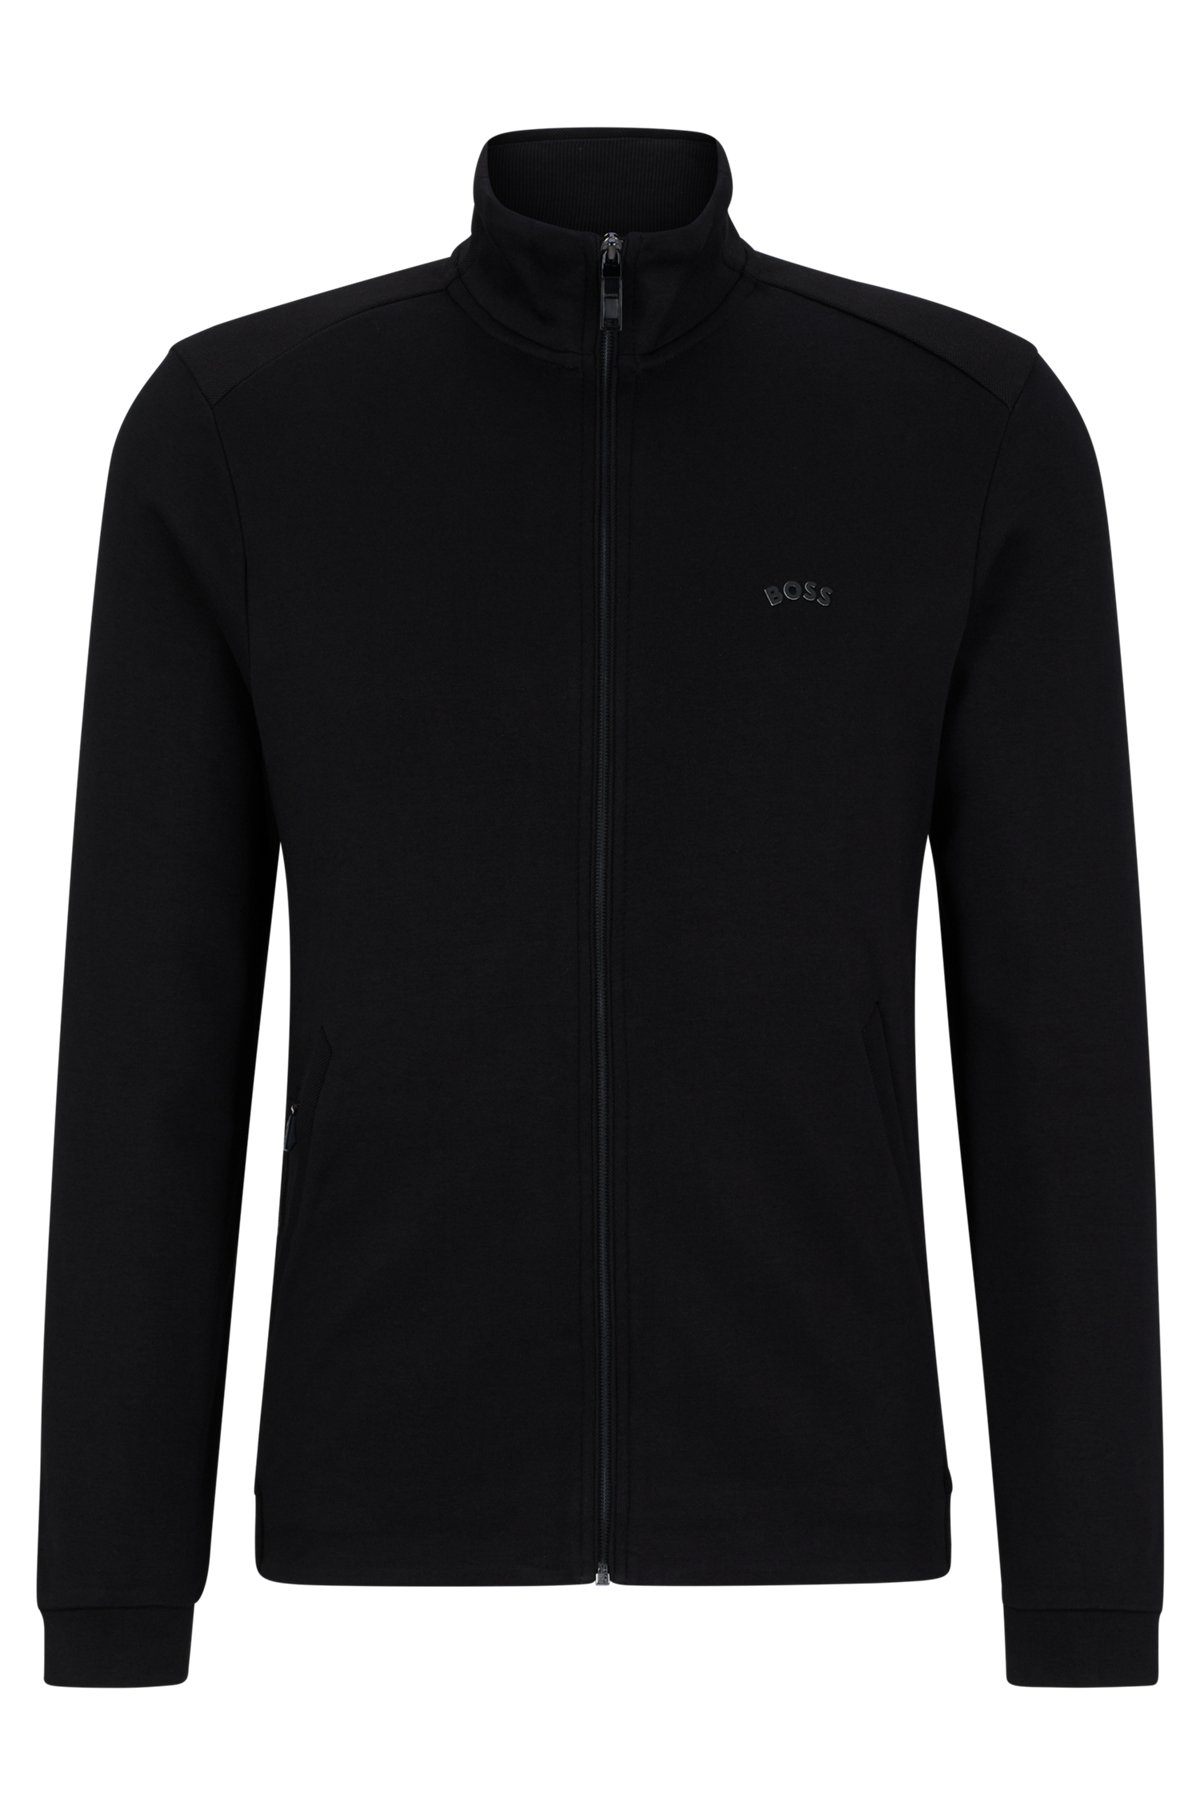 Zip-up sweatshirt in organic cotton with curved logo, Black